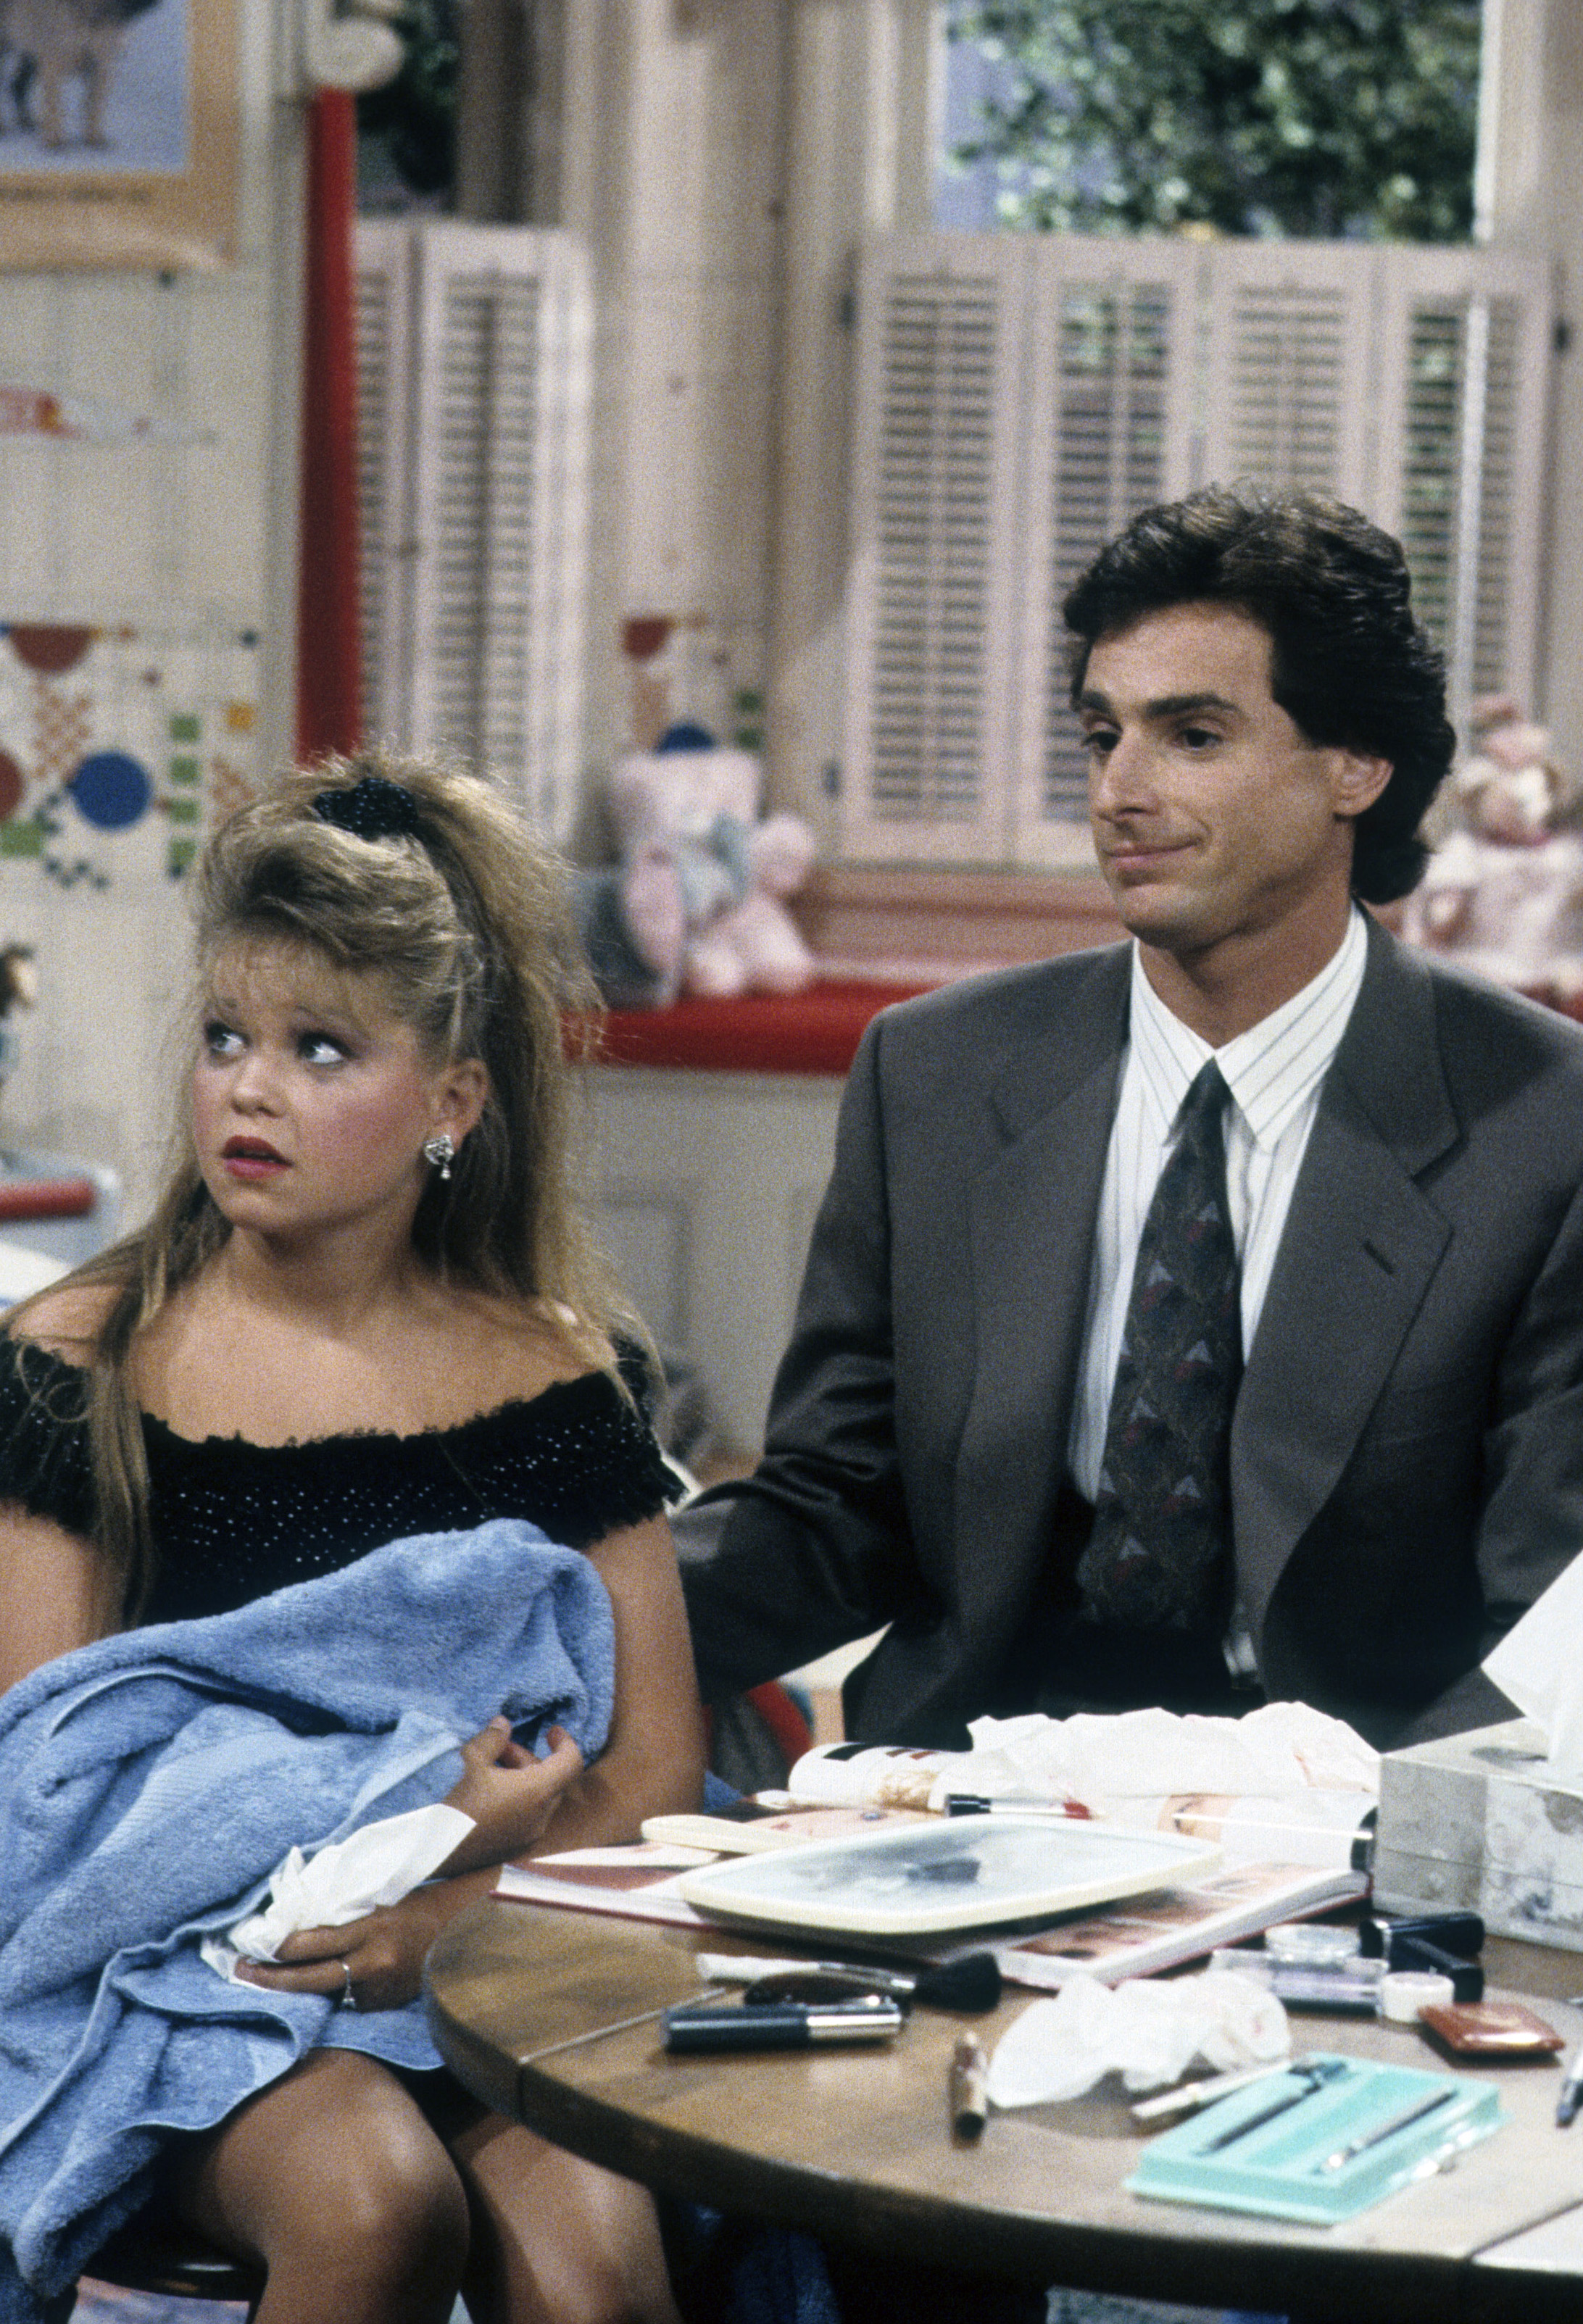 Candace Cameron Bure and Bob Saget in the ABC TV series "Full House" in Los Angeles, California in 1989 | Source: Getty Images